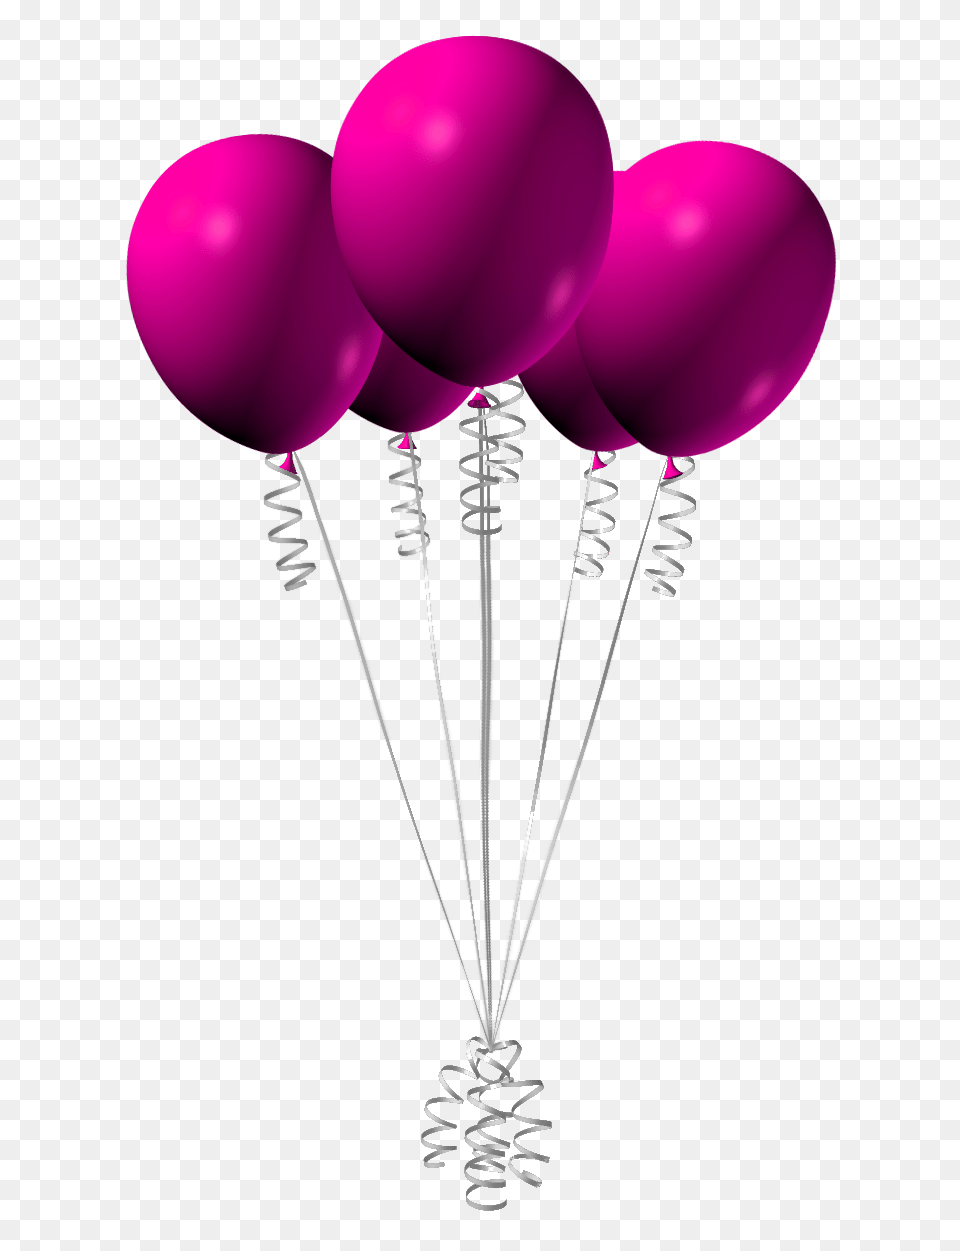 Hd Pink Birthday Balloons Transparent Image Pink Balloons Transparent Background, Balloon, Purple, Coil, Spiral Free Png